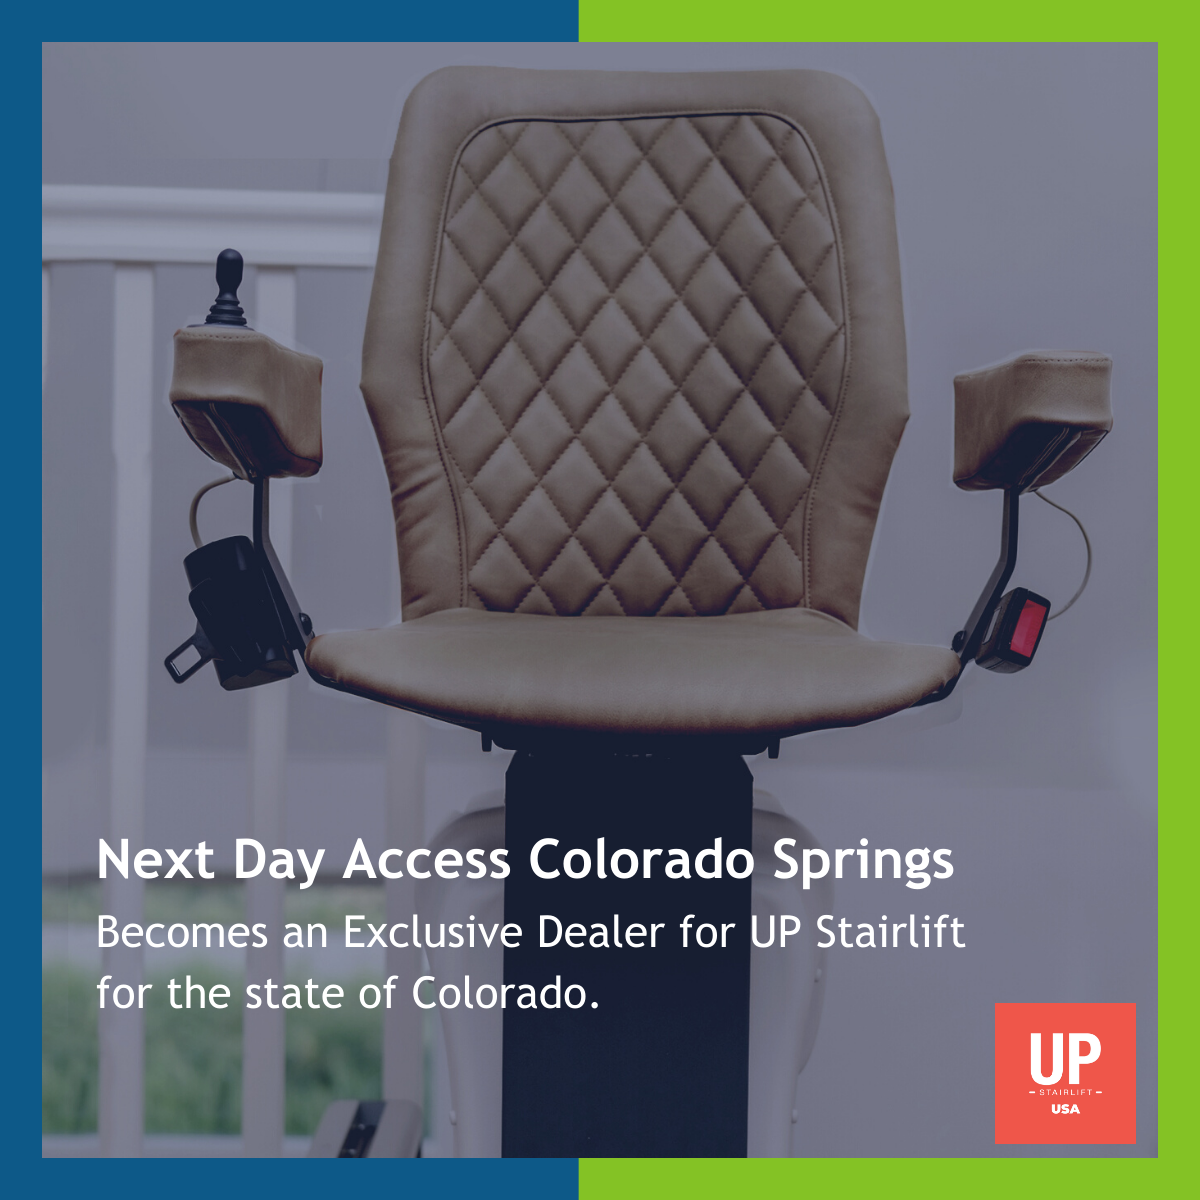 Next Day Access Becomes an Exclusive Dealer for UP Stairlift 1